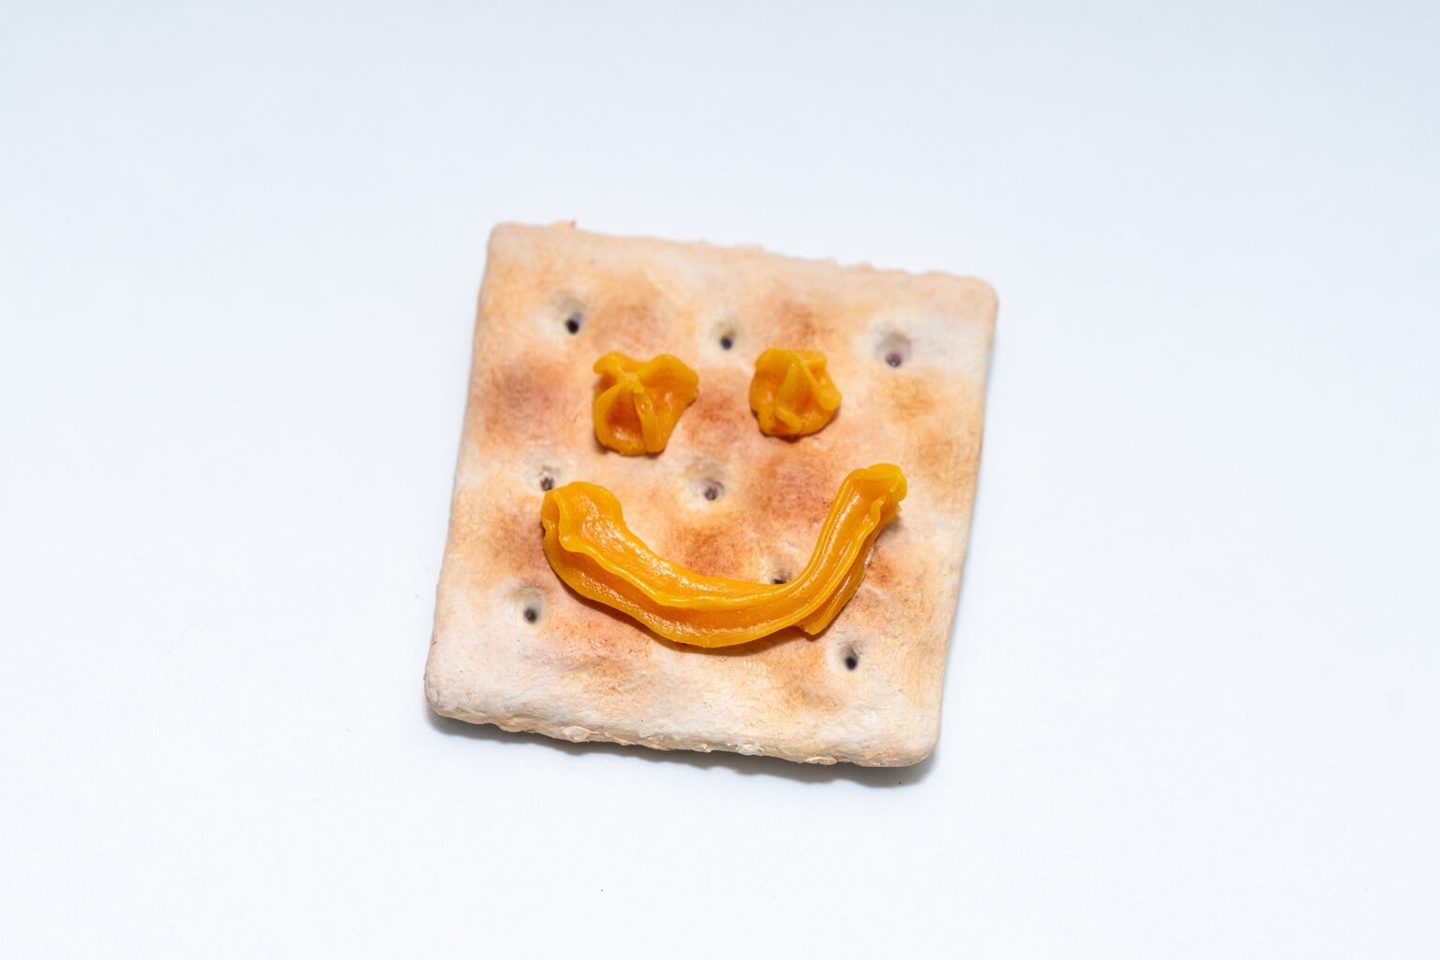 image of a sculpture of a cracker with a cheese smiley face on it, made from pewter, pigmented resin, and oil-based paint